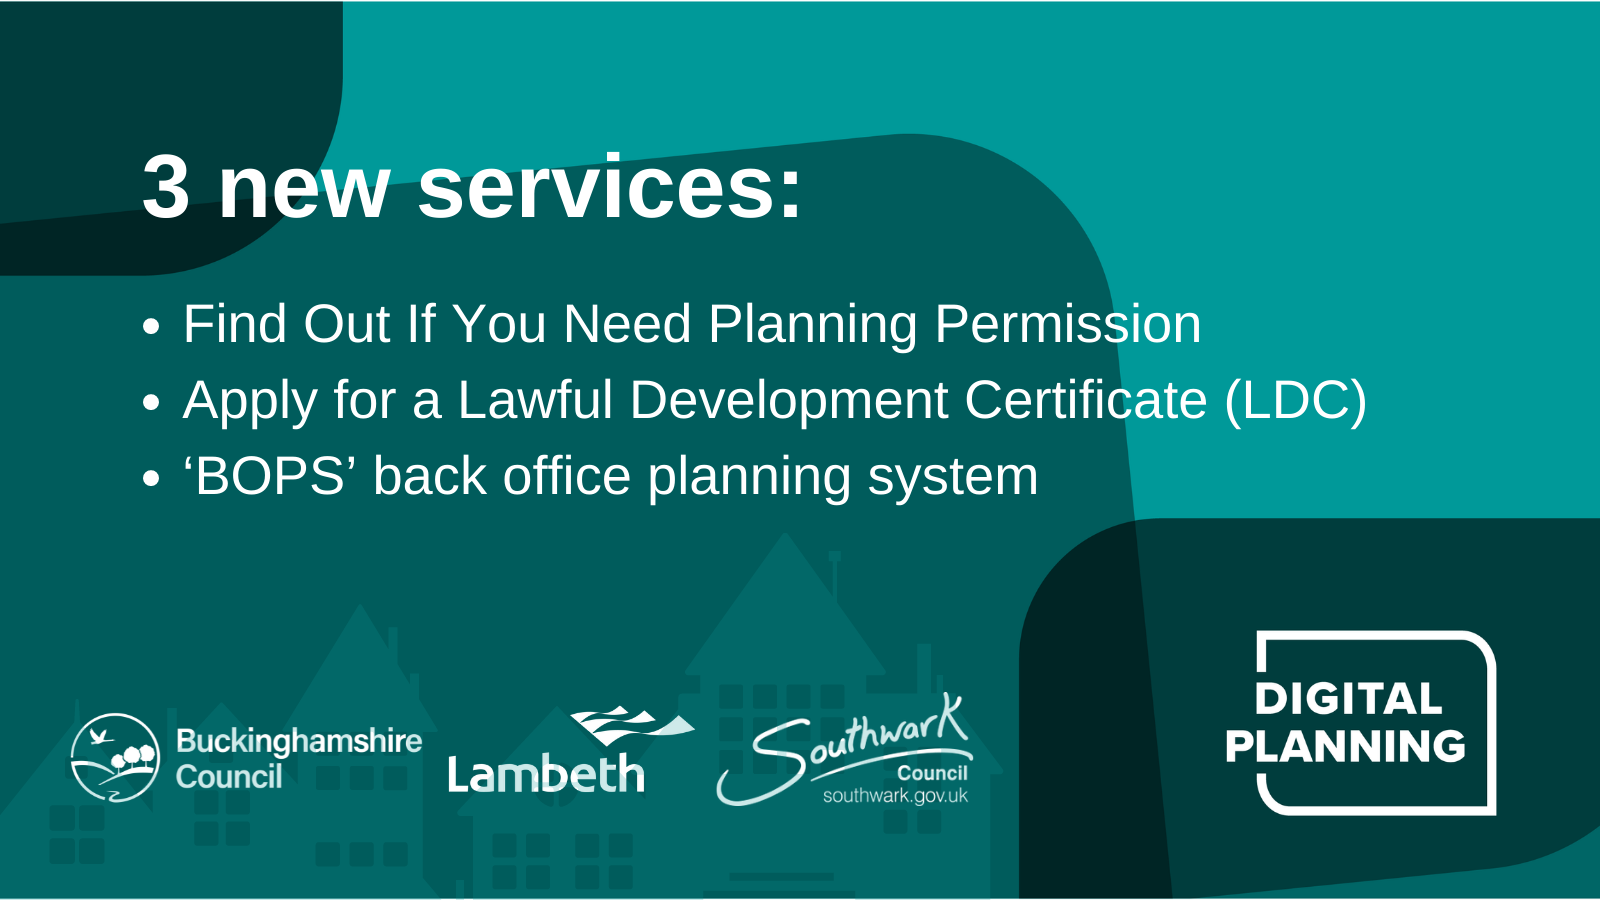 3 new services: Find Out If You Need Planning Permission Apply for a Lawful Development Certificate (LDC) ‘BOPS’ back office planning system Buckinghamshire Council, Lambeth, Southwark Council, Digital Planning